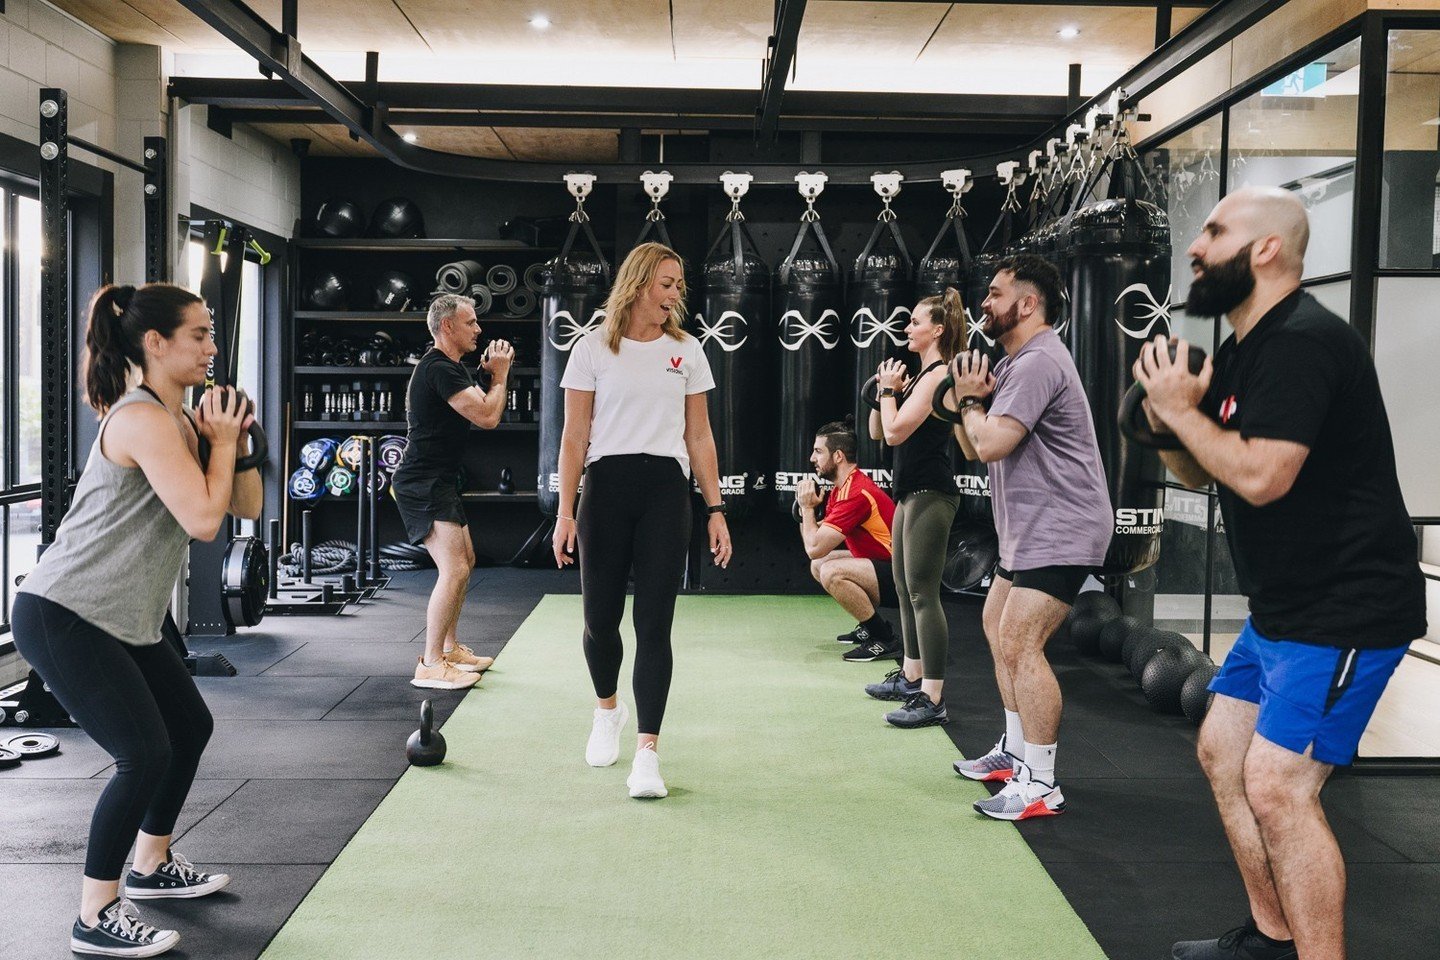 Need a post-summer pick-me-up?⁠
Our Group Training has you sorted ✨️